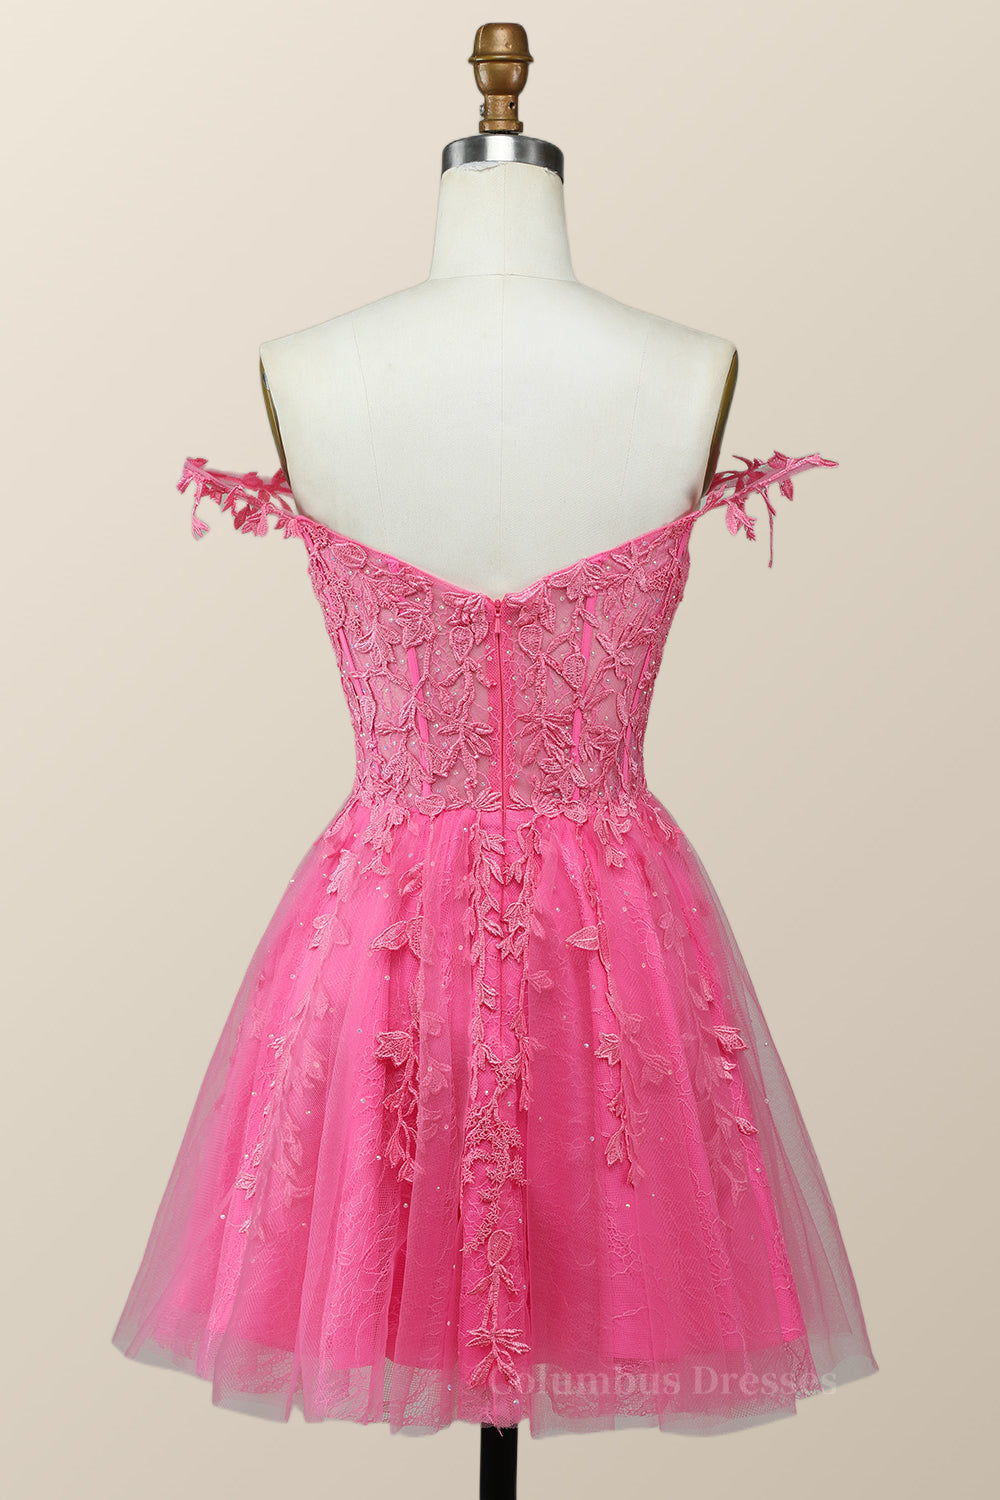 Bridesmaid Dress Outdoor Wedding, Off the Shoulder Hot Pink Lace Short Homecoming Dress